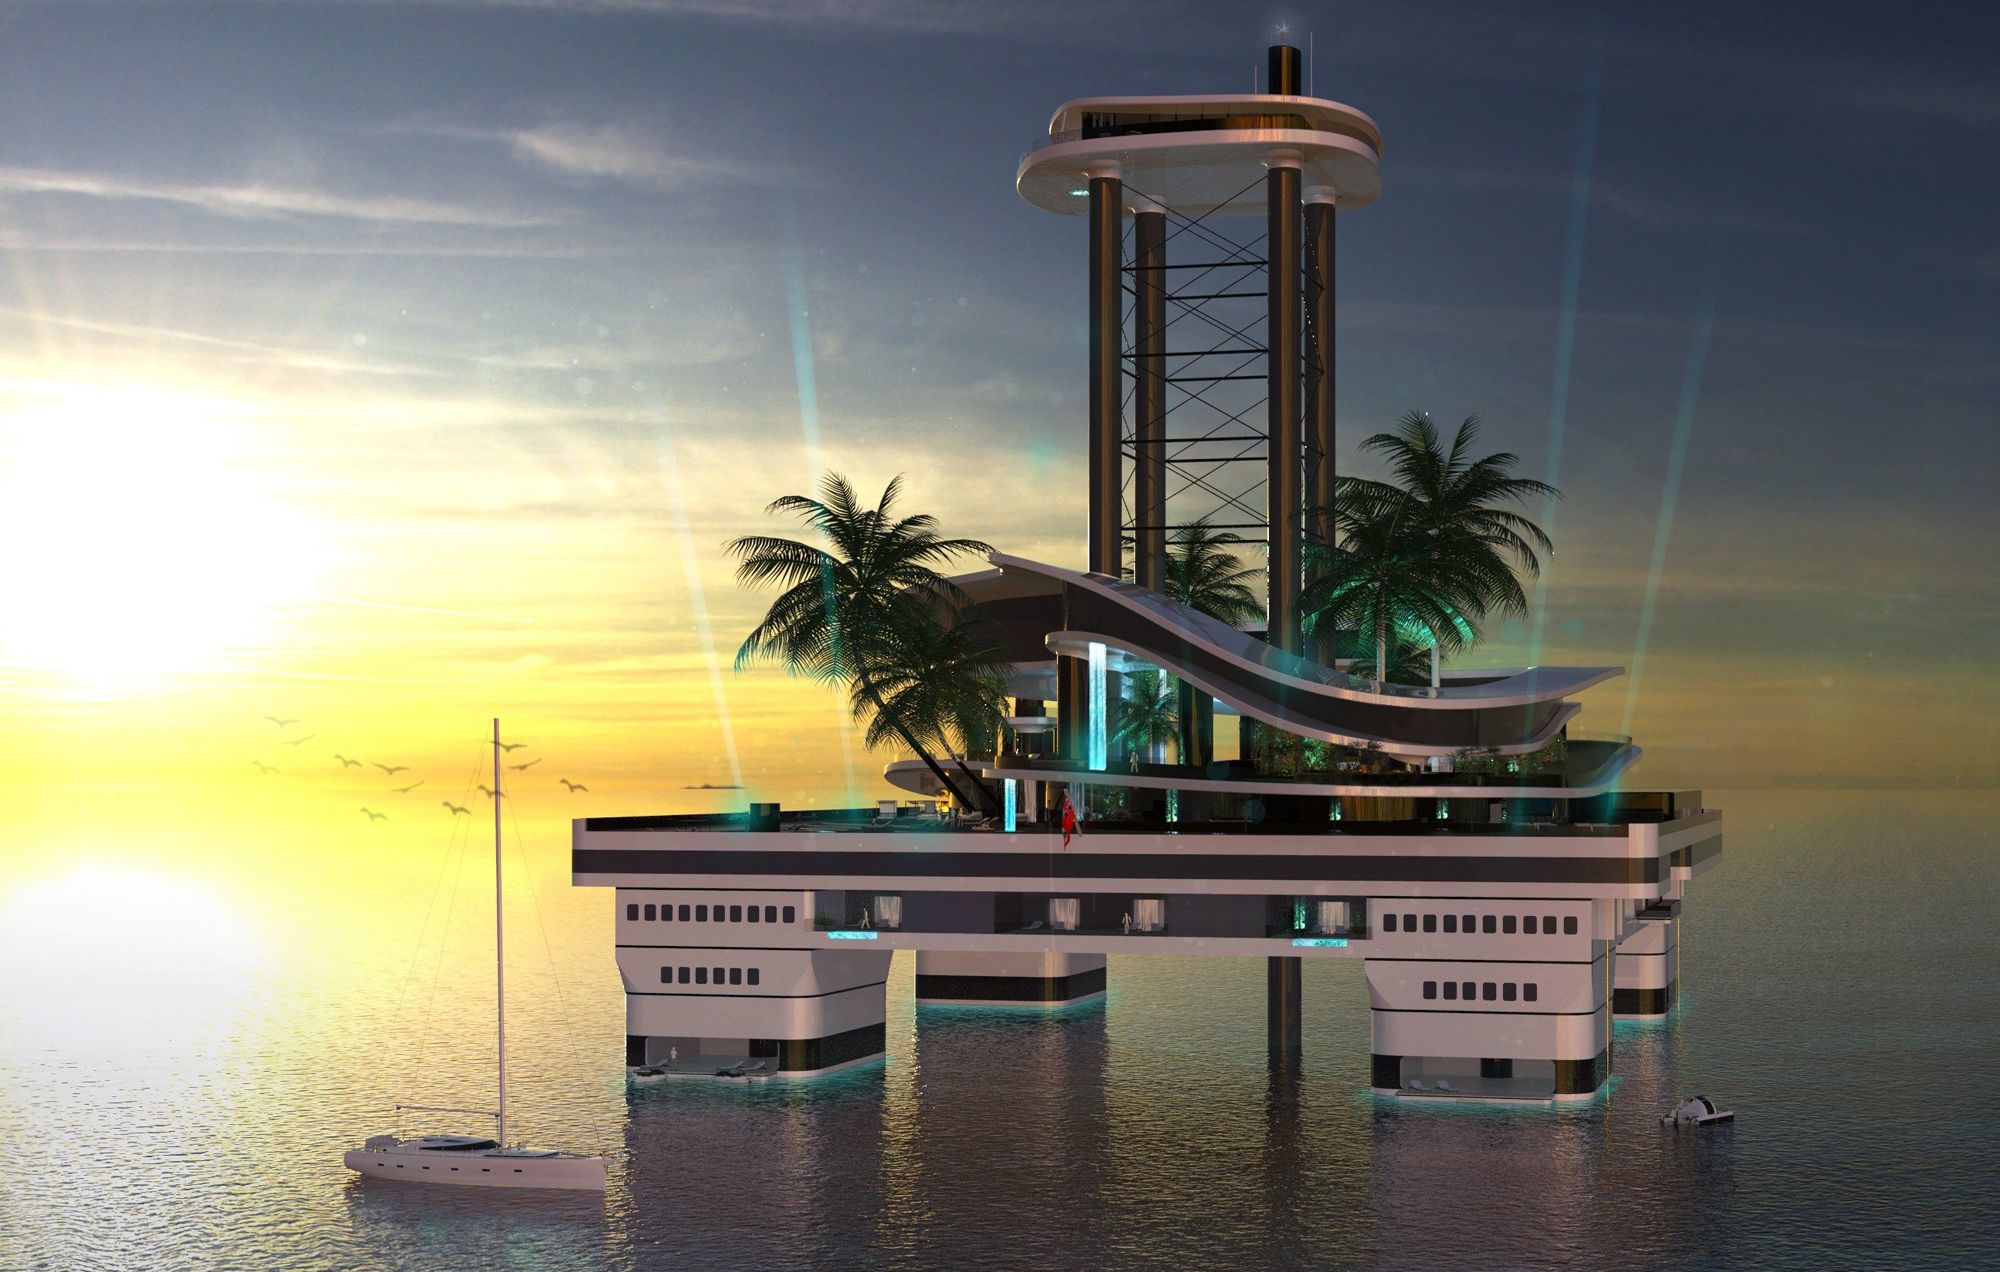 This Private Floating Island Yacht is the Zenith of Billionaire Toys